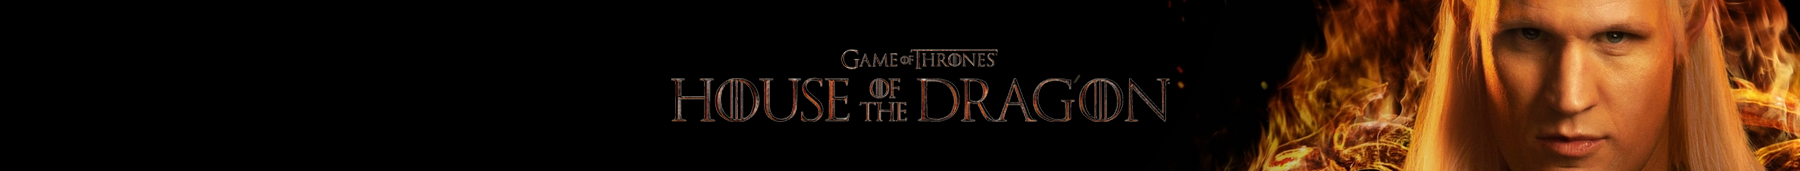 Game of Thrones House of the Dragon